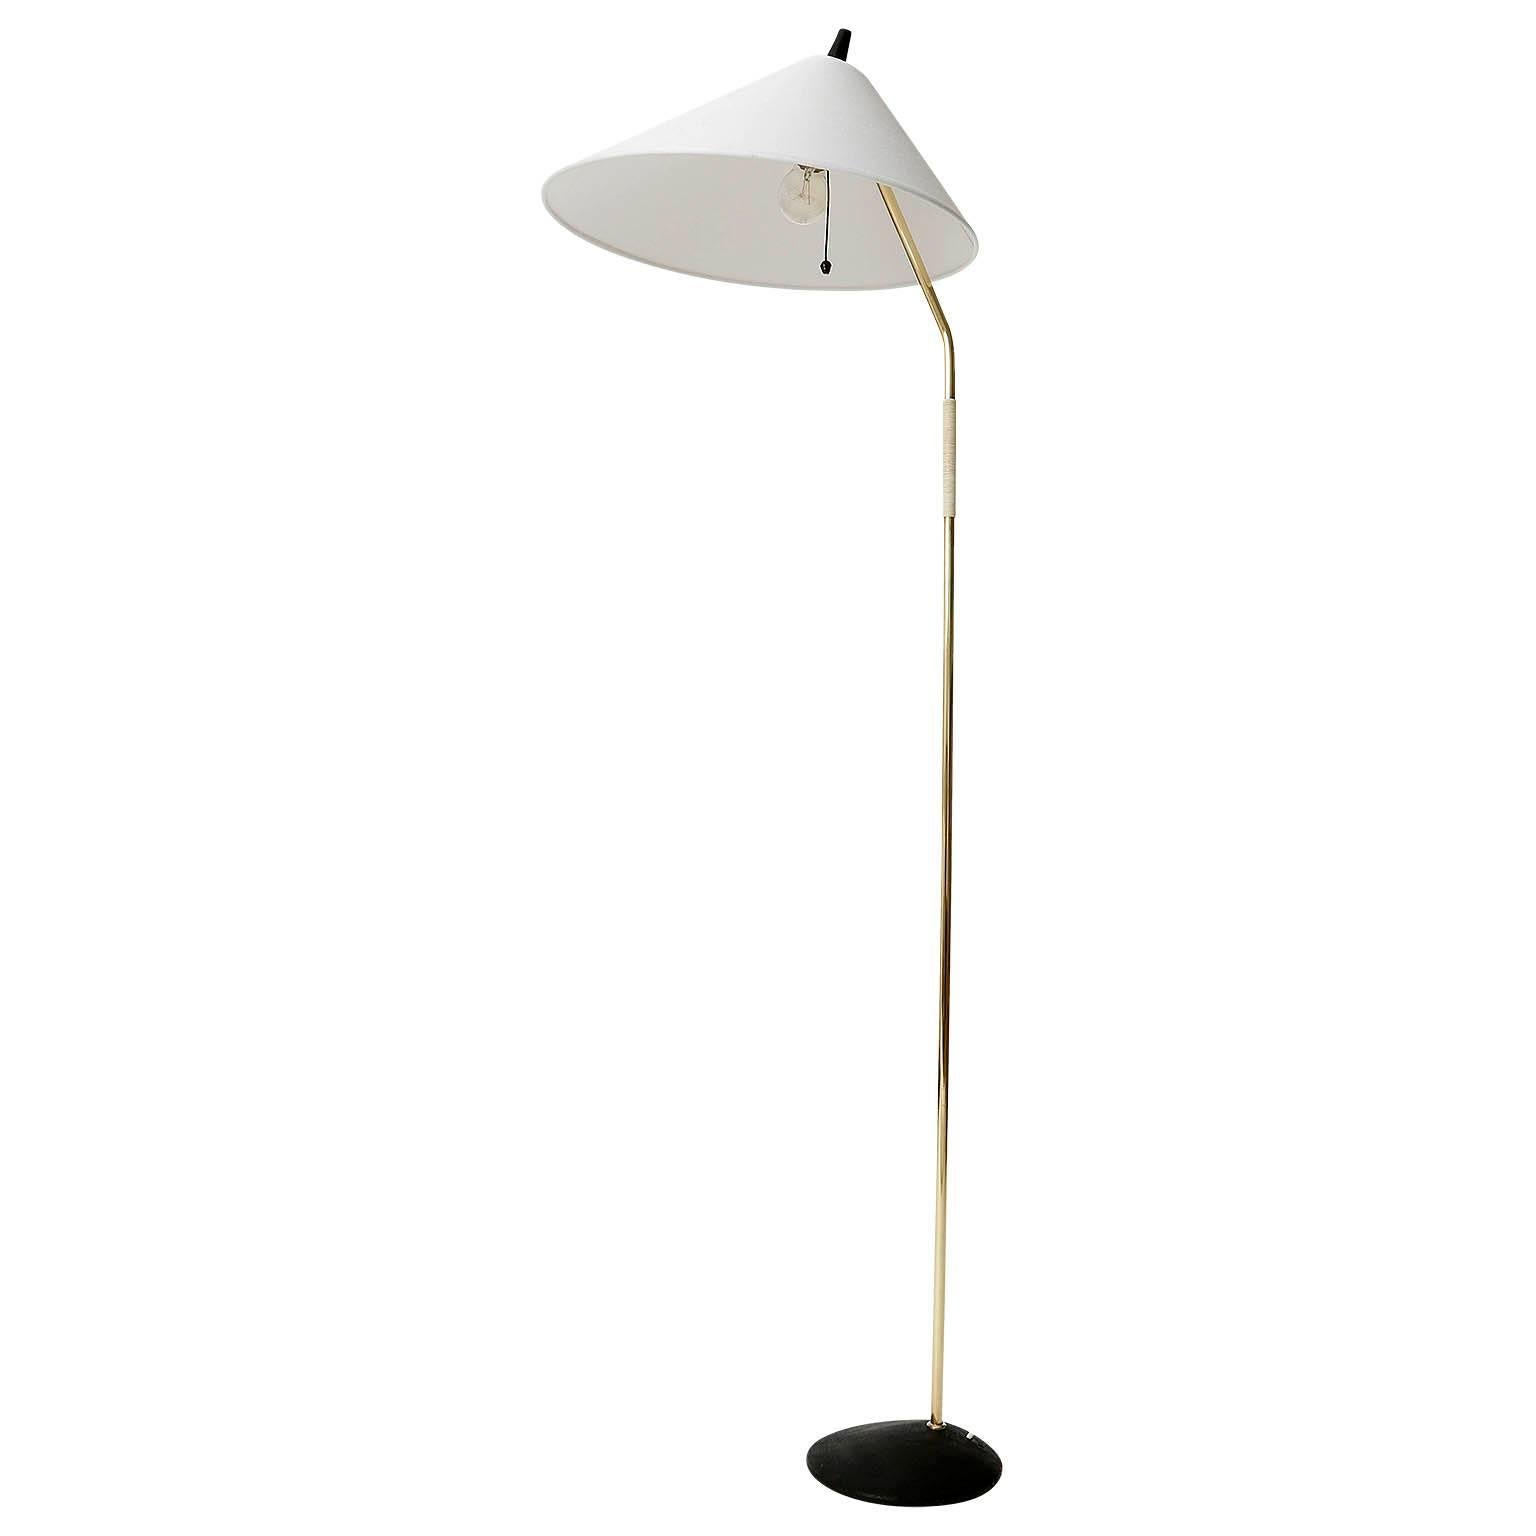 An Austrian brass floor lamp manufactured in midcentury, circa 1960 (end of 1950s or early 1960s).
The fixture is attributed to Rupert Nikoll or J.T. Kalmar.
The light is in excellent condition. It has been rewired, repolished and the natural